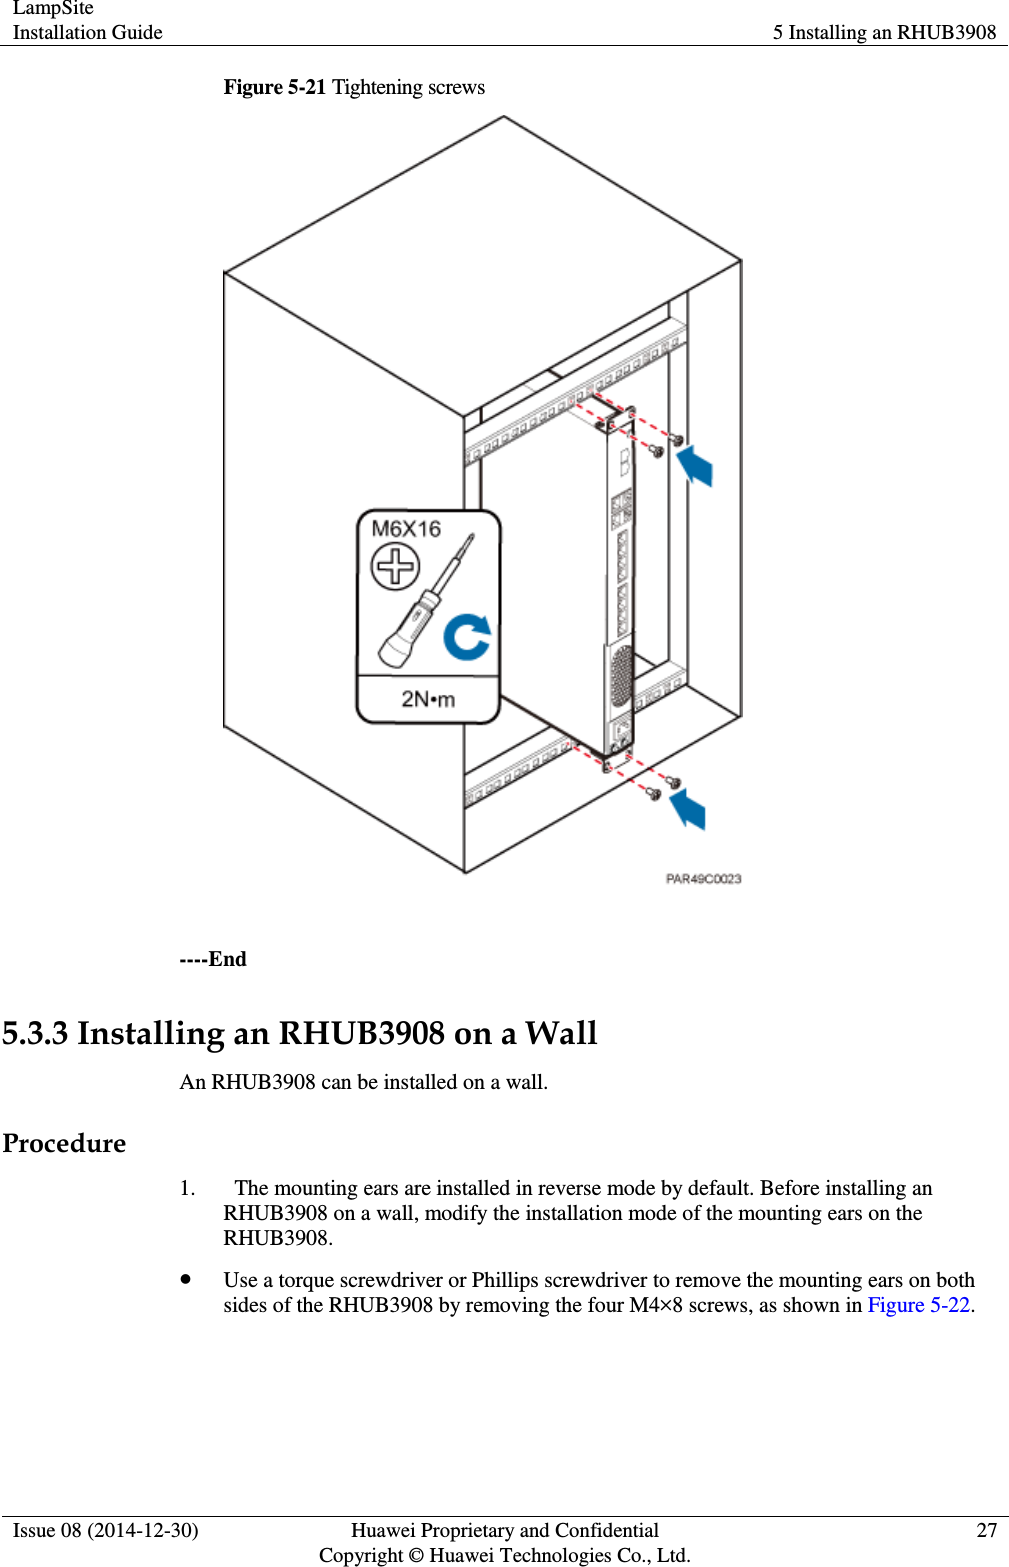 LampSite Installation Guide 5 Installing an RHUB3908  Issue 08 (2014-12-30) Huawei Proprietary and Confidential                                     Copyright © Huawei Technologies Co., Ltd. 27  Figure 5-21 Tightening screws   ----End 5.3.3 Installing an RHUB3908 on a Wall An RHUB3908 can be installed on a wall.   Procedure 1.   The mounting ears are installed in reverse mode by default. Before installing an RHUB3908 on a wall, modify the installation mode of the mounting ears on the RHUB3908.    Use a torque screwdriver or Phillips screwdriver to remove the mounting ears on both sides of the RHUB3908 by removing the four M4×8 screws, as shown in Figure 5-22.   